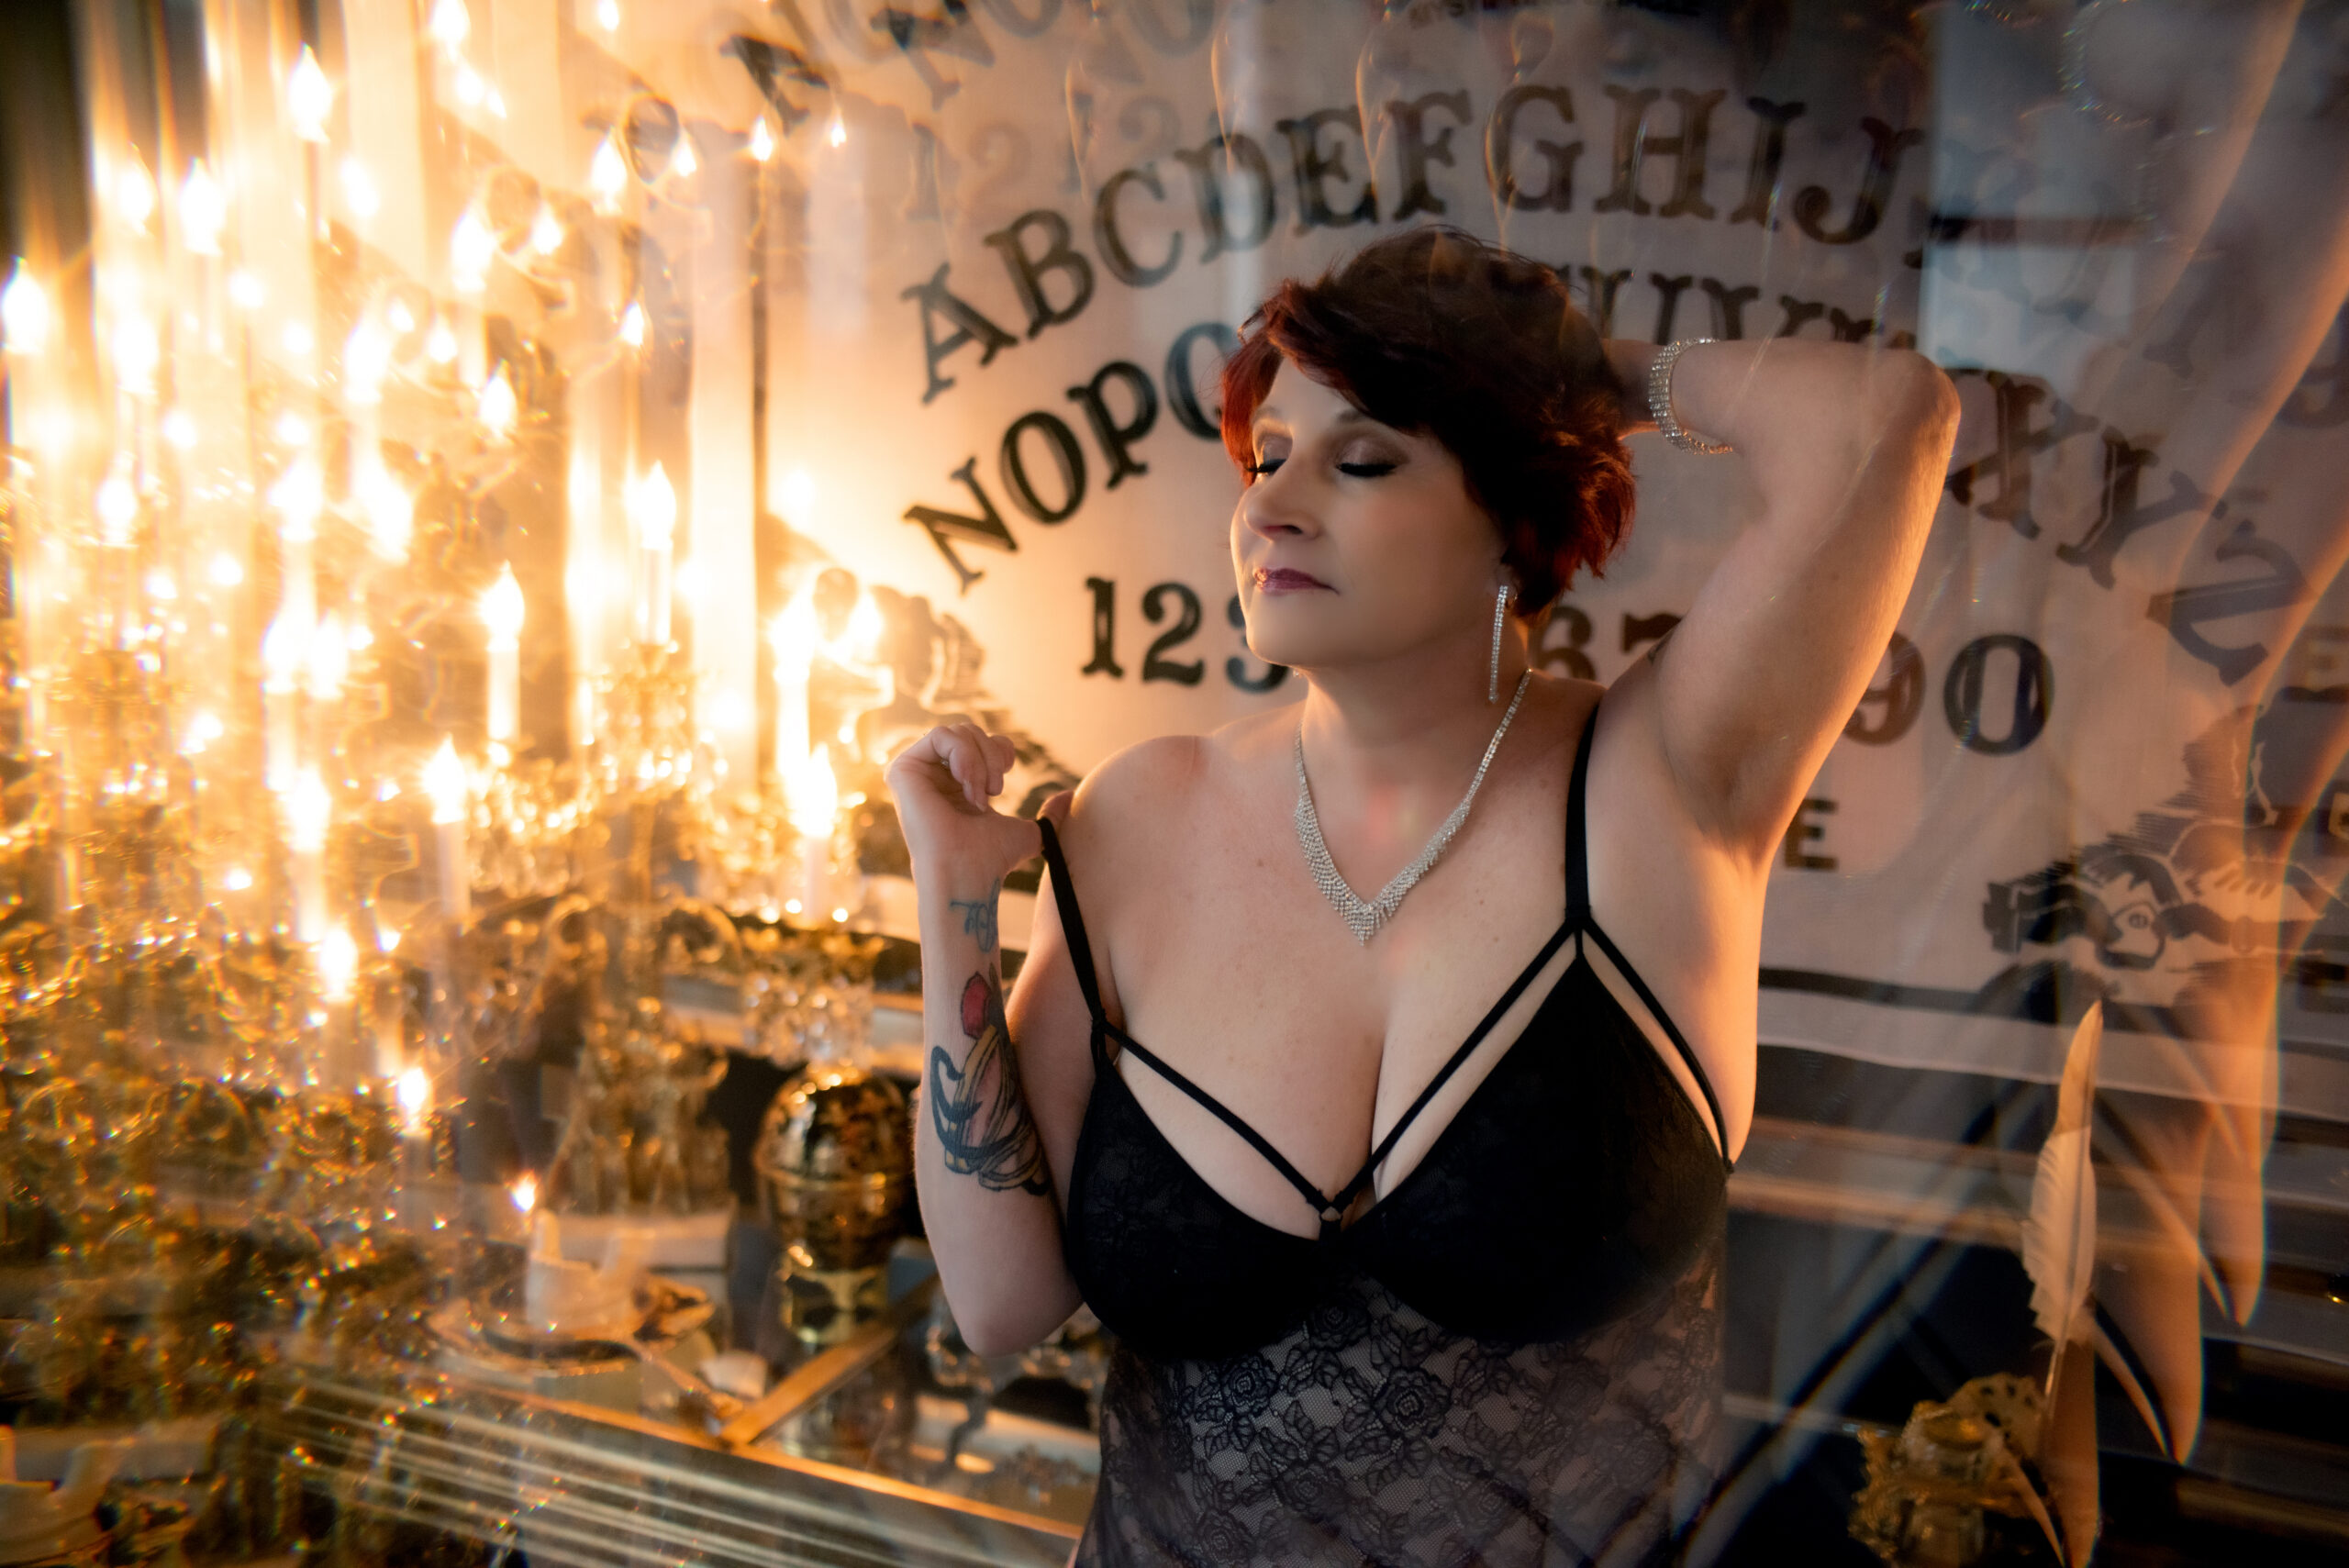 Lit by candle light, an older woman with short reddish-brown hair poses confidently in a black lingerie set in front of the iconic ouija board print in the gold and black master bedroom. The setting is the opulent Gatsby penthouse in Midtown, St. Louis, Missouri, owned by Josh Gould of Gould Holdings. The image was captured by Aloha Kelly of Love Exposed Boudoir.